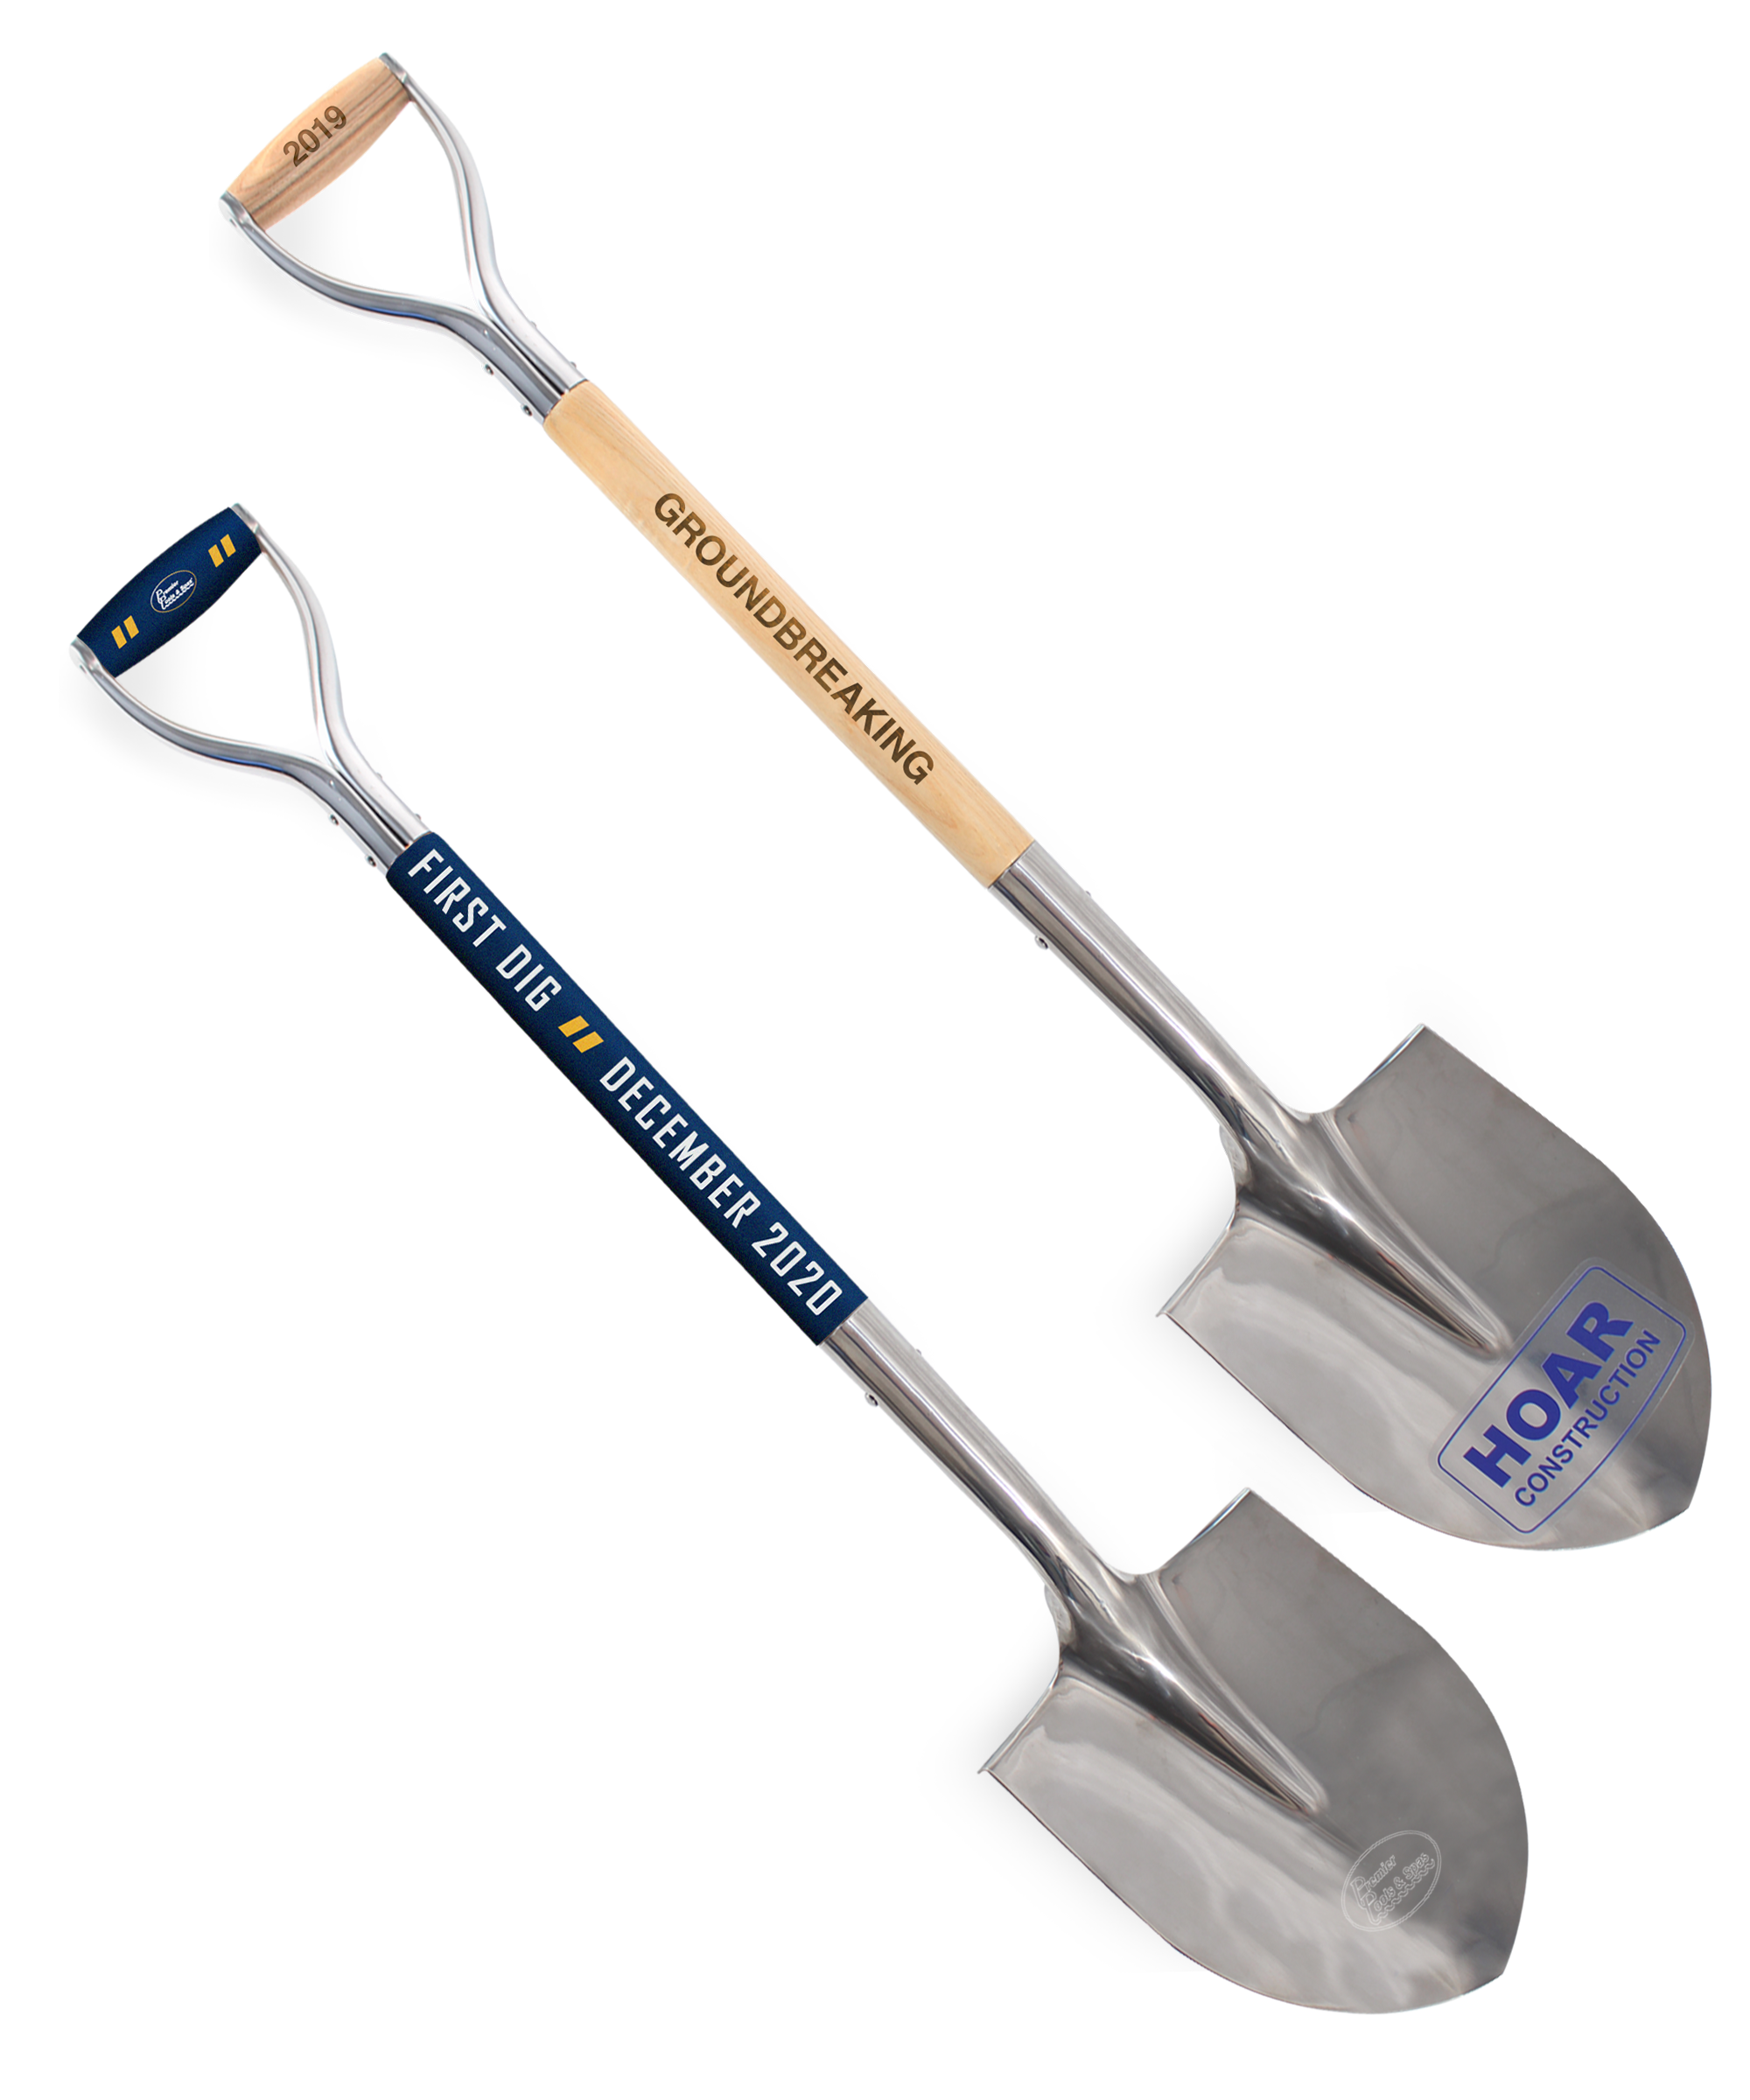 Spade Color: Stainless Steel